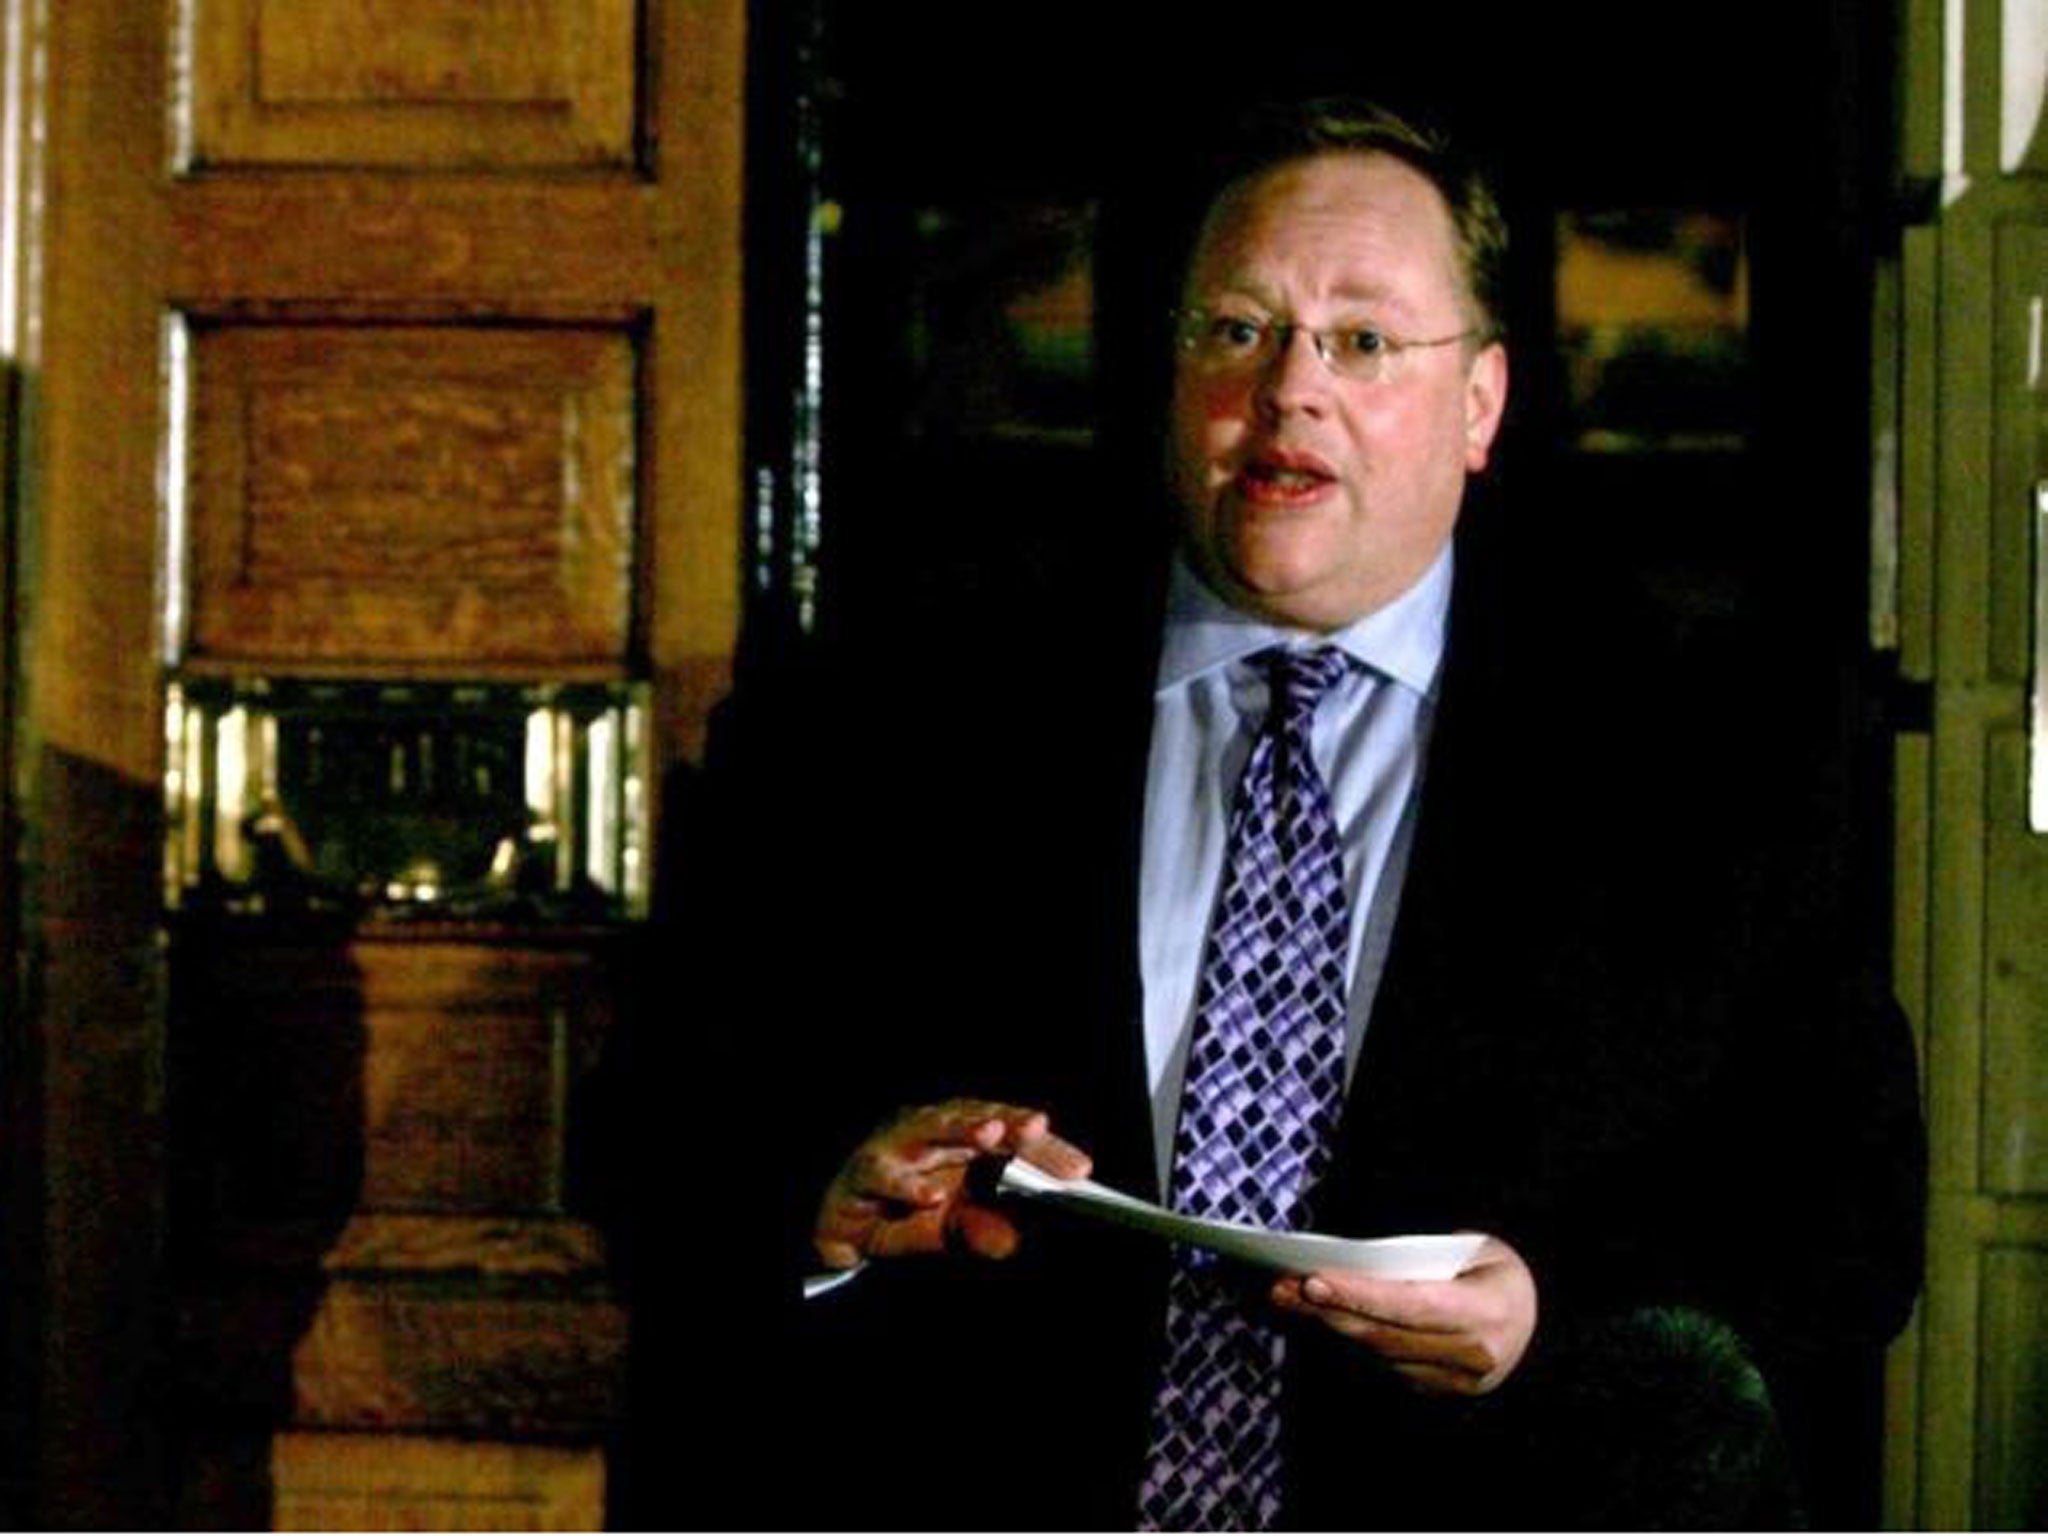 Liberal Democrat peer Lord Rennard has been asked to apologise over allegations of sexual harassment against female activists